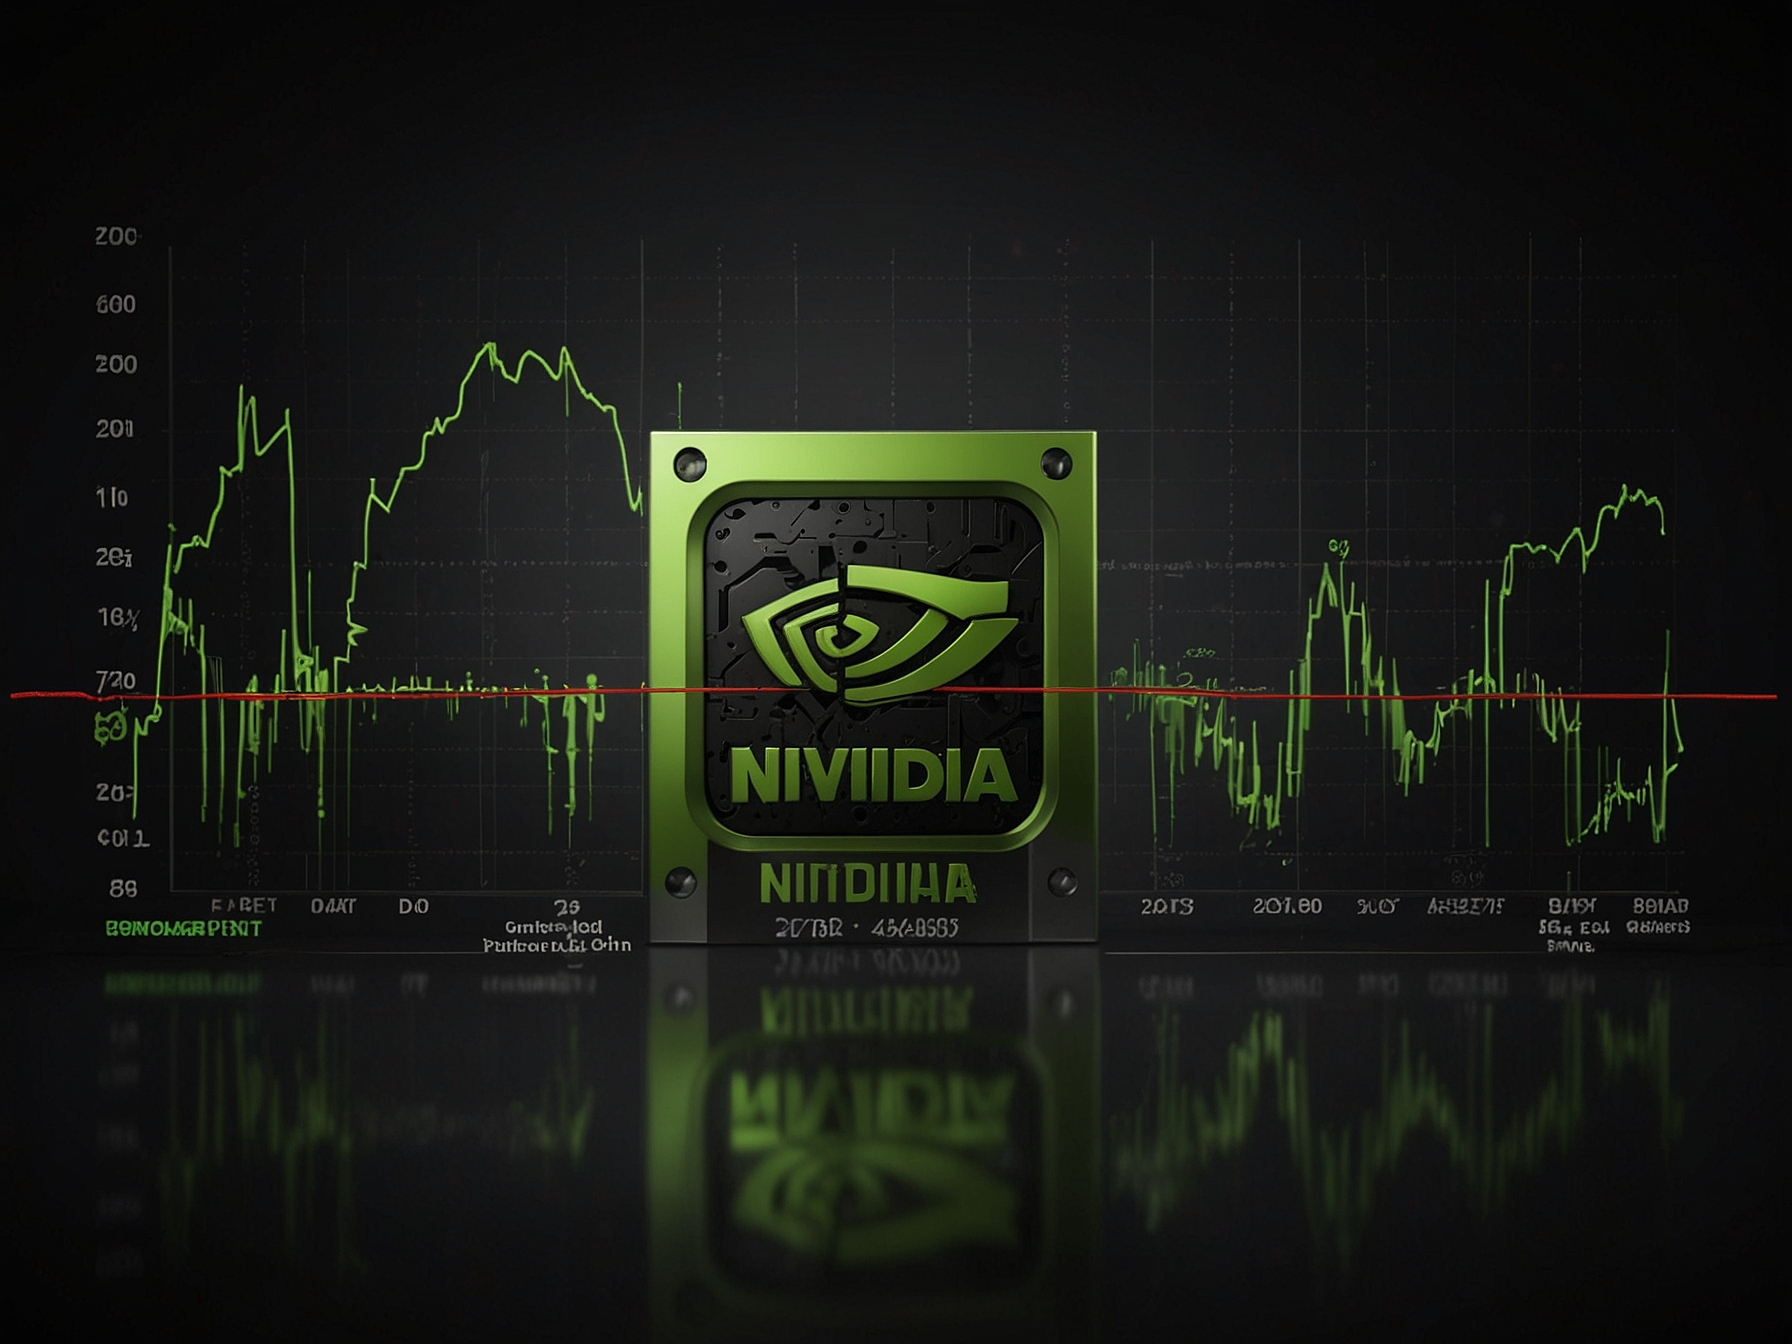 Illustration showing Nvidia's stock split history with key dates and split ratios, from the first split in 2000 to the latest in 2021. Highlights the exponential increase in the number of shares owned.